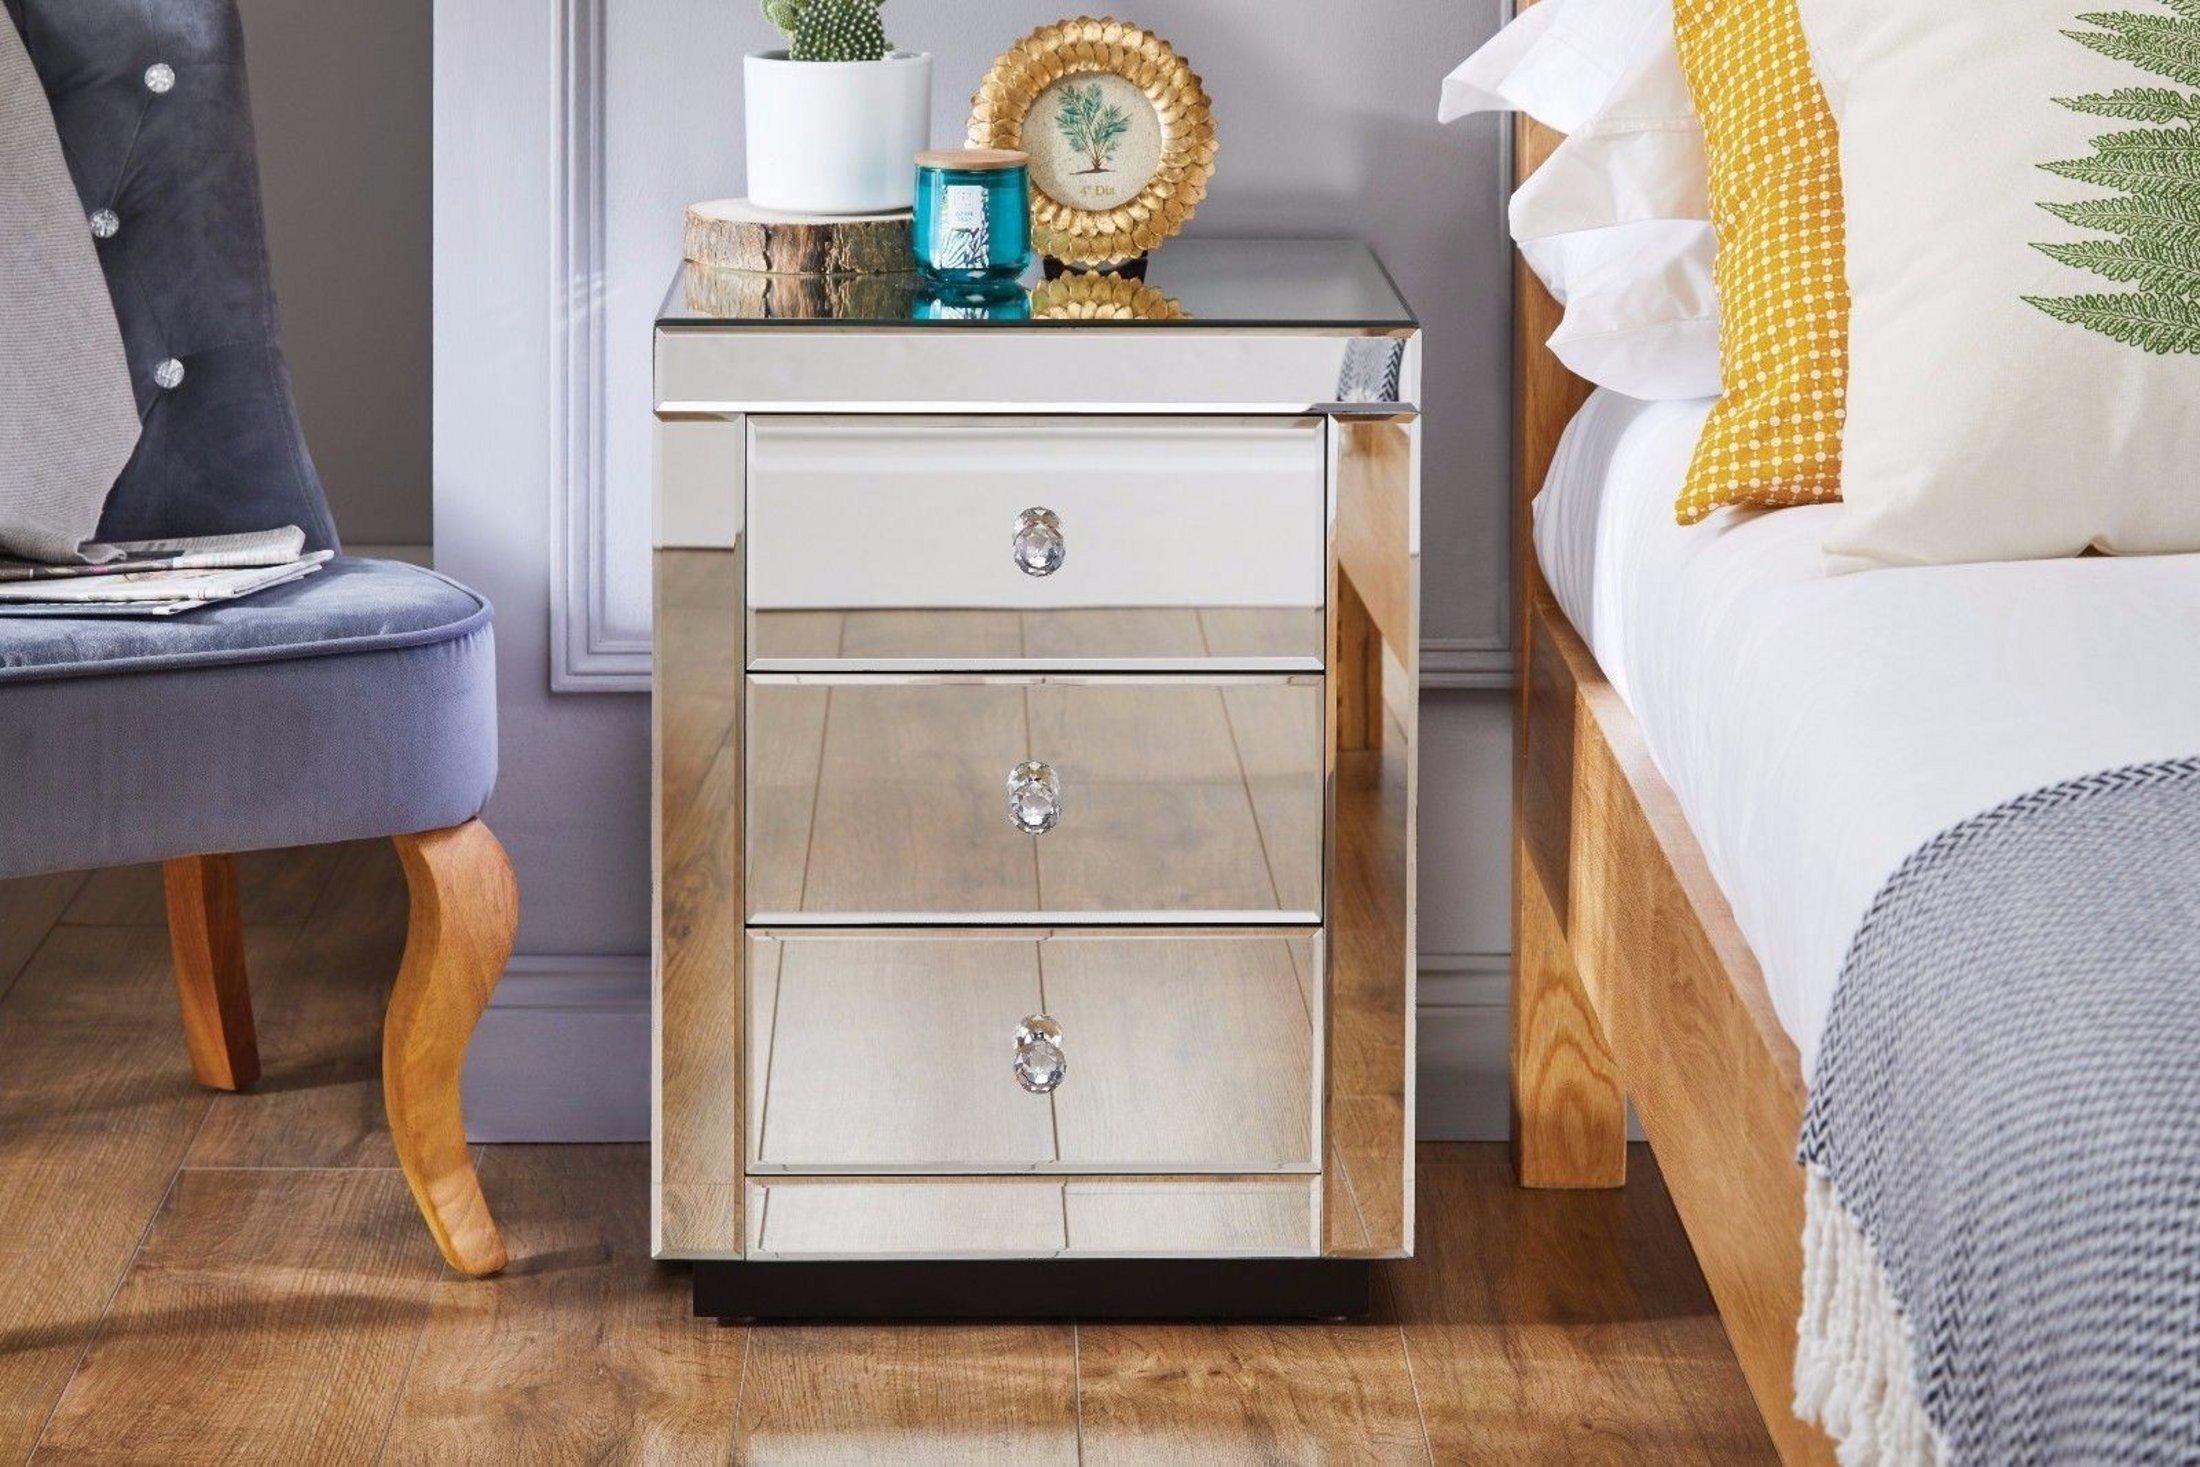 Italian Inspired Contemporary Mirrored 3 Drawer Rectangular Bedside Table with Crystaline Shaped Han